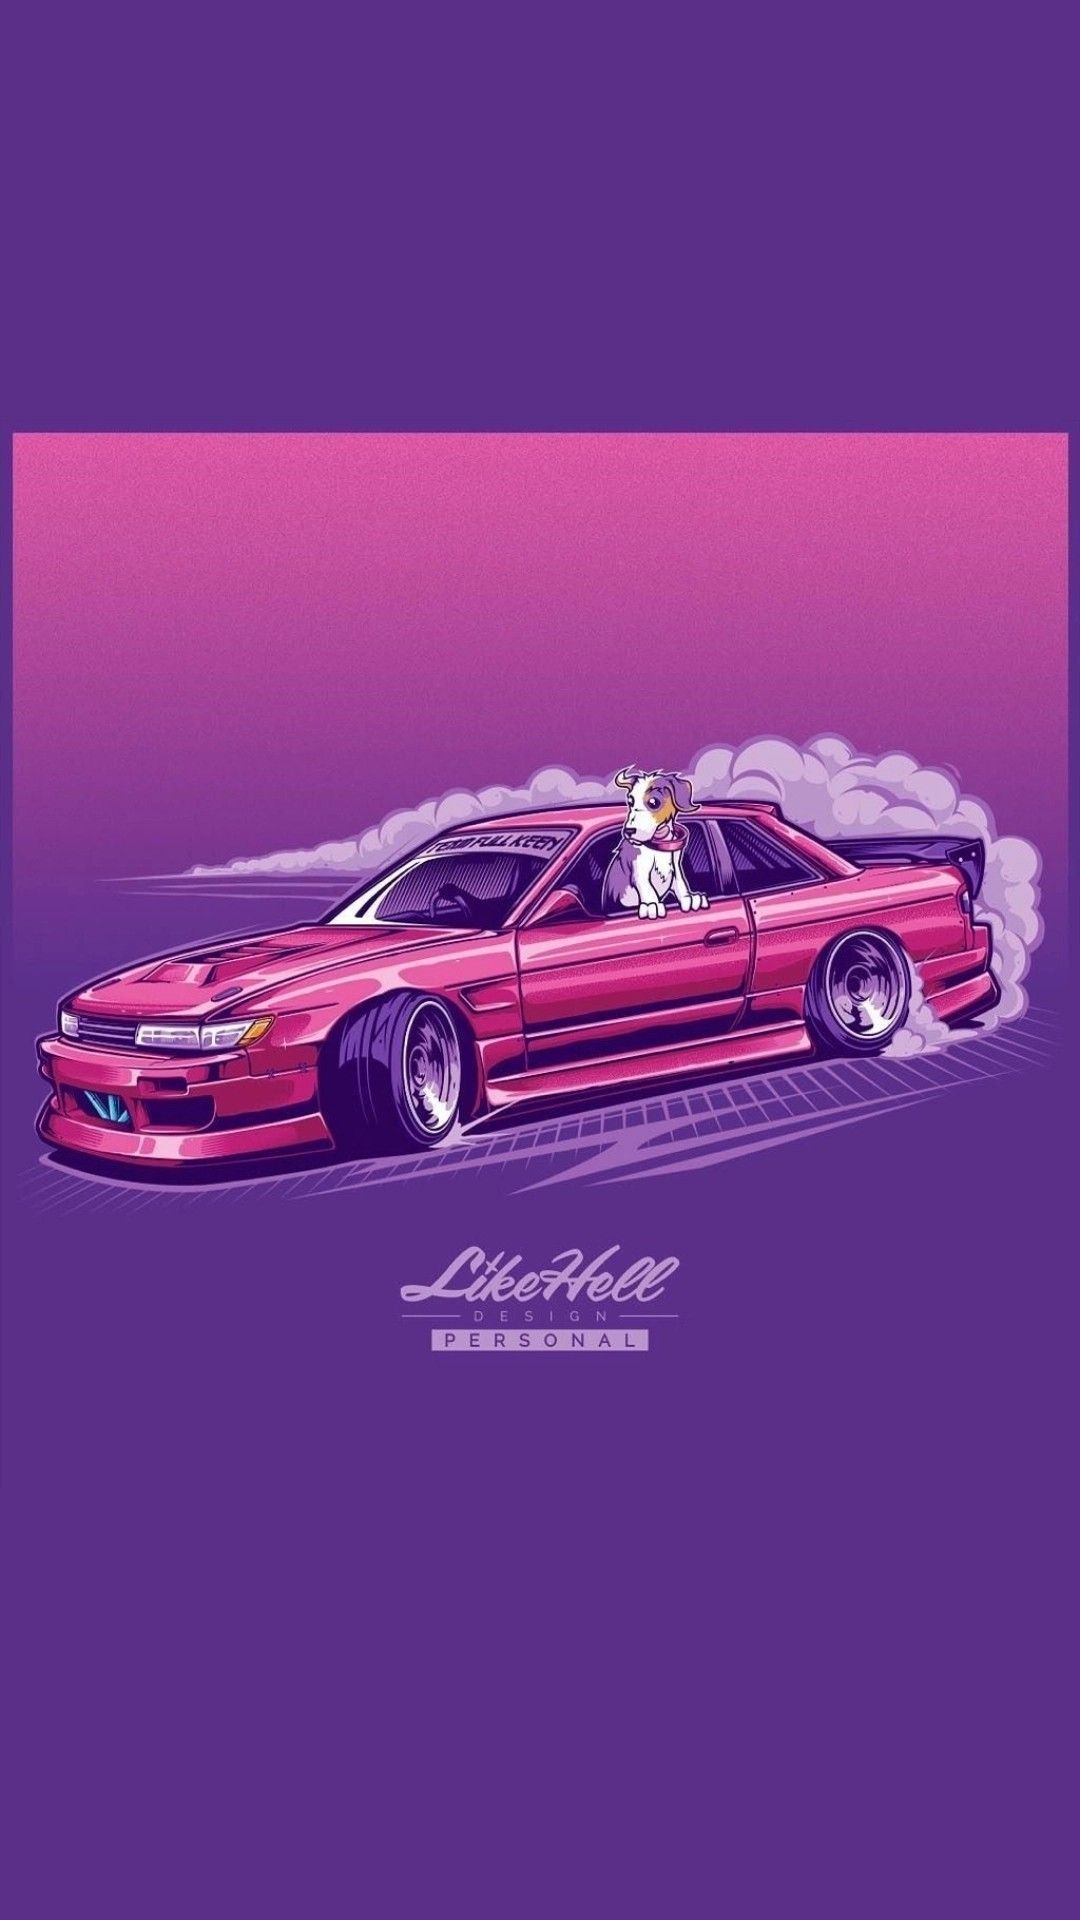 A pink car with smoke coming out of it - Cars, JDM